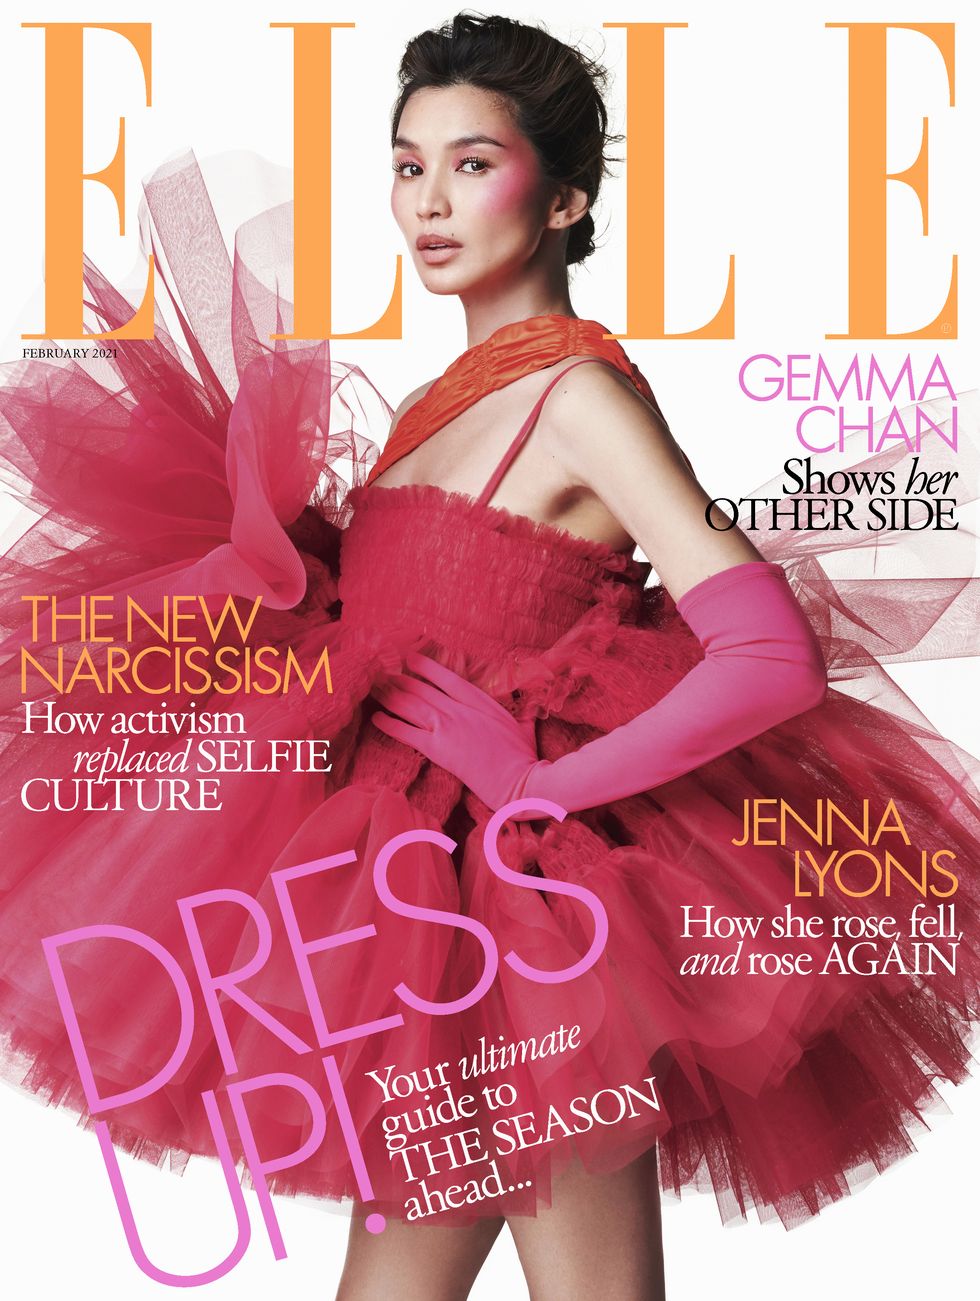 Gemma Chan Cover Interview - ELLE February 2021